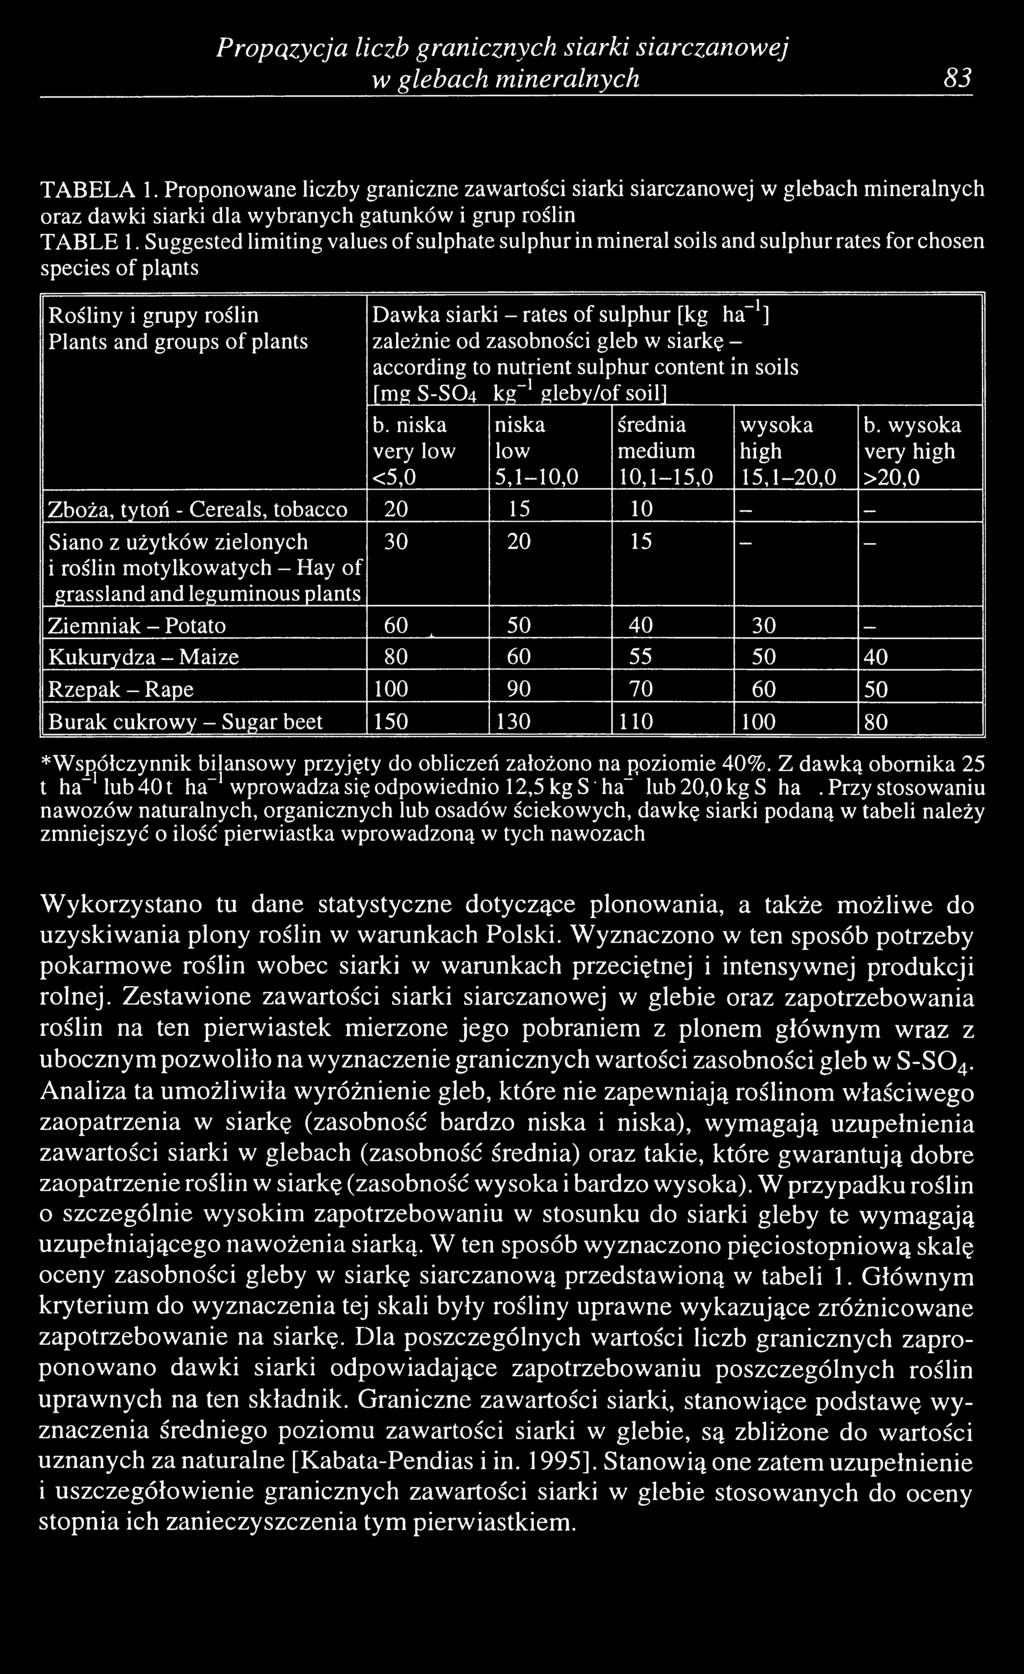 Suggested limiting values of sulphate sulphur in mineral soils and sulphur rates for chosen species of pląnts Rośliny i grupy roślin Plants and groups of plants Dawka siarki - rates of sulphur [kg